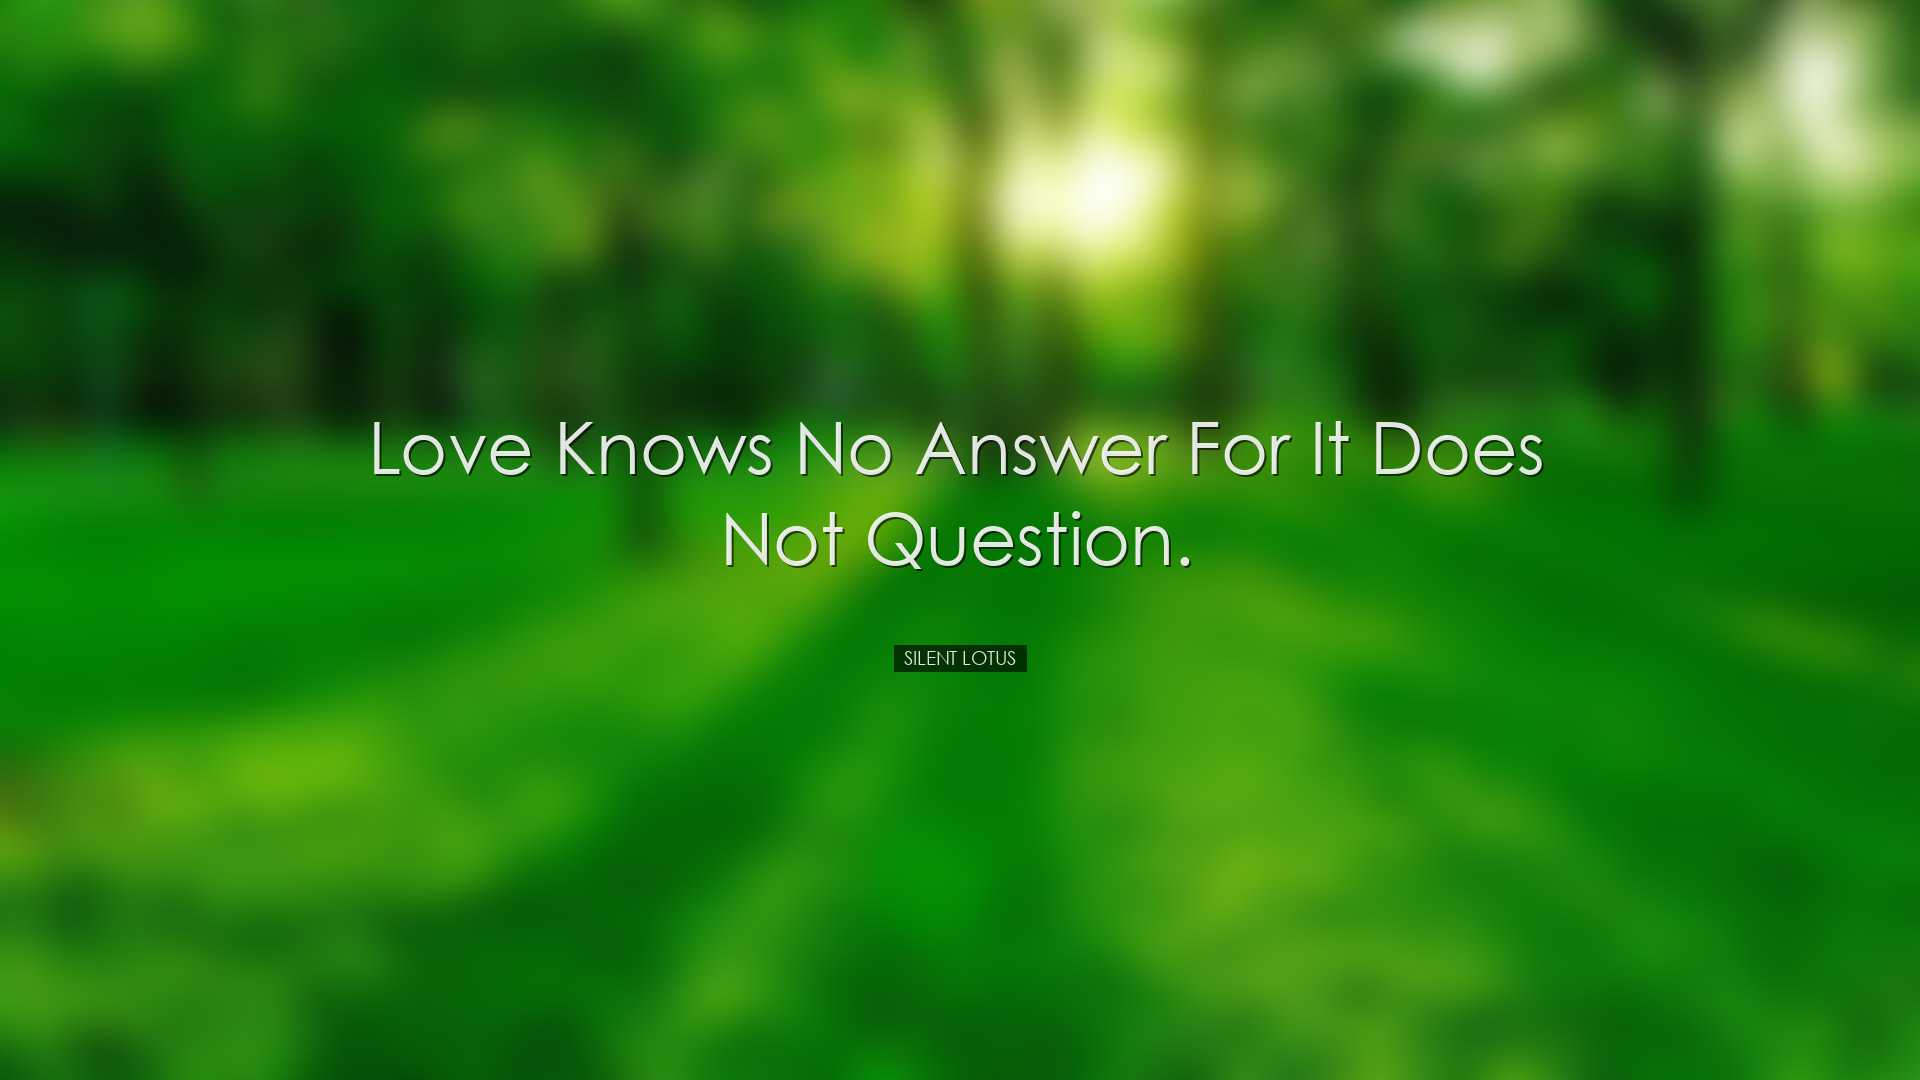 Love knows no answer for it does not question. - Silent Lotus